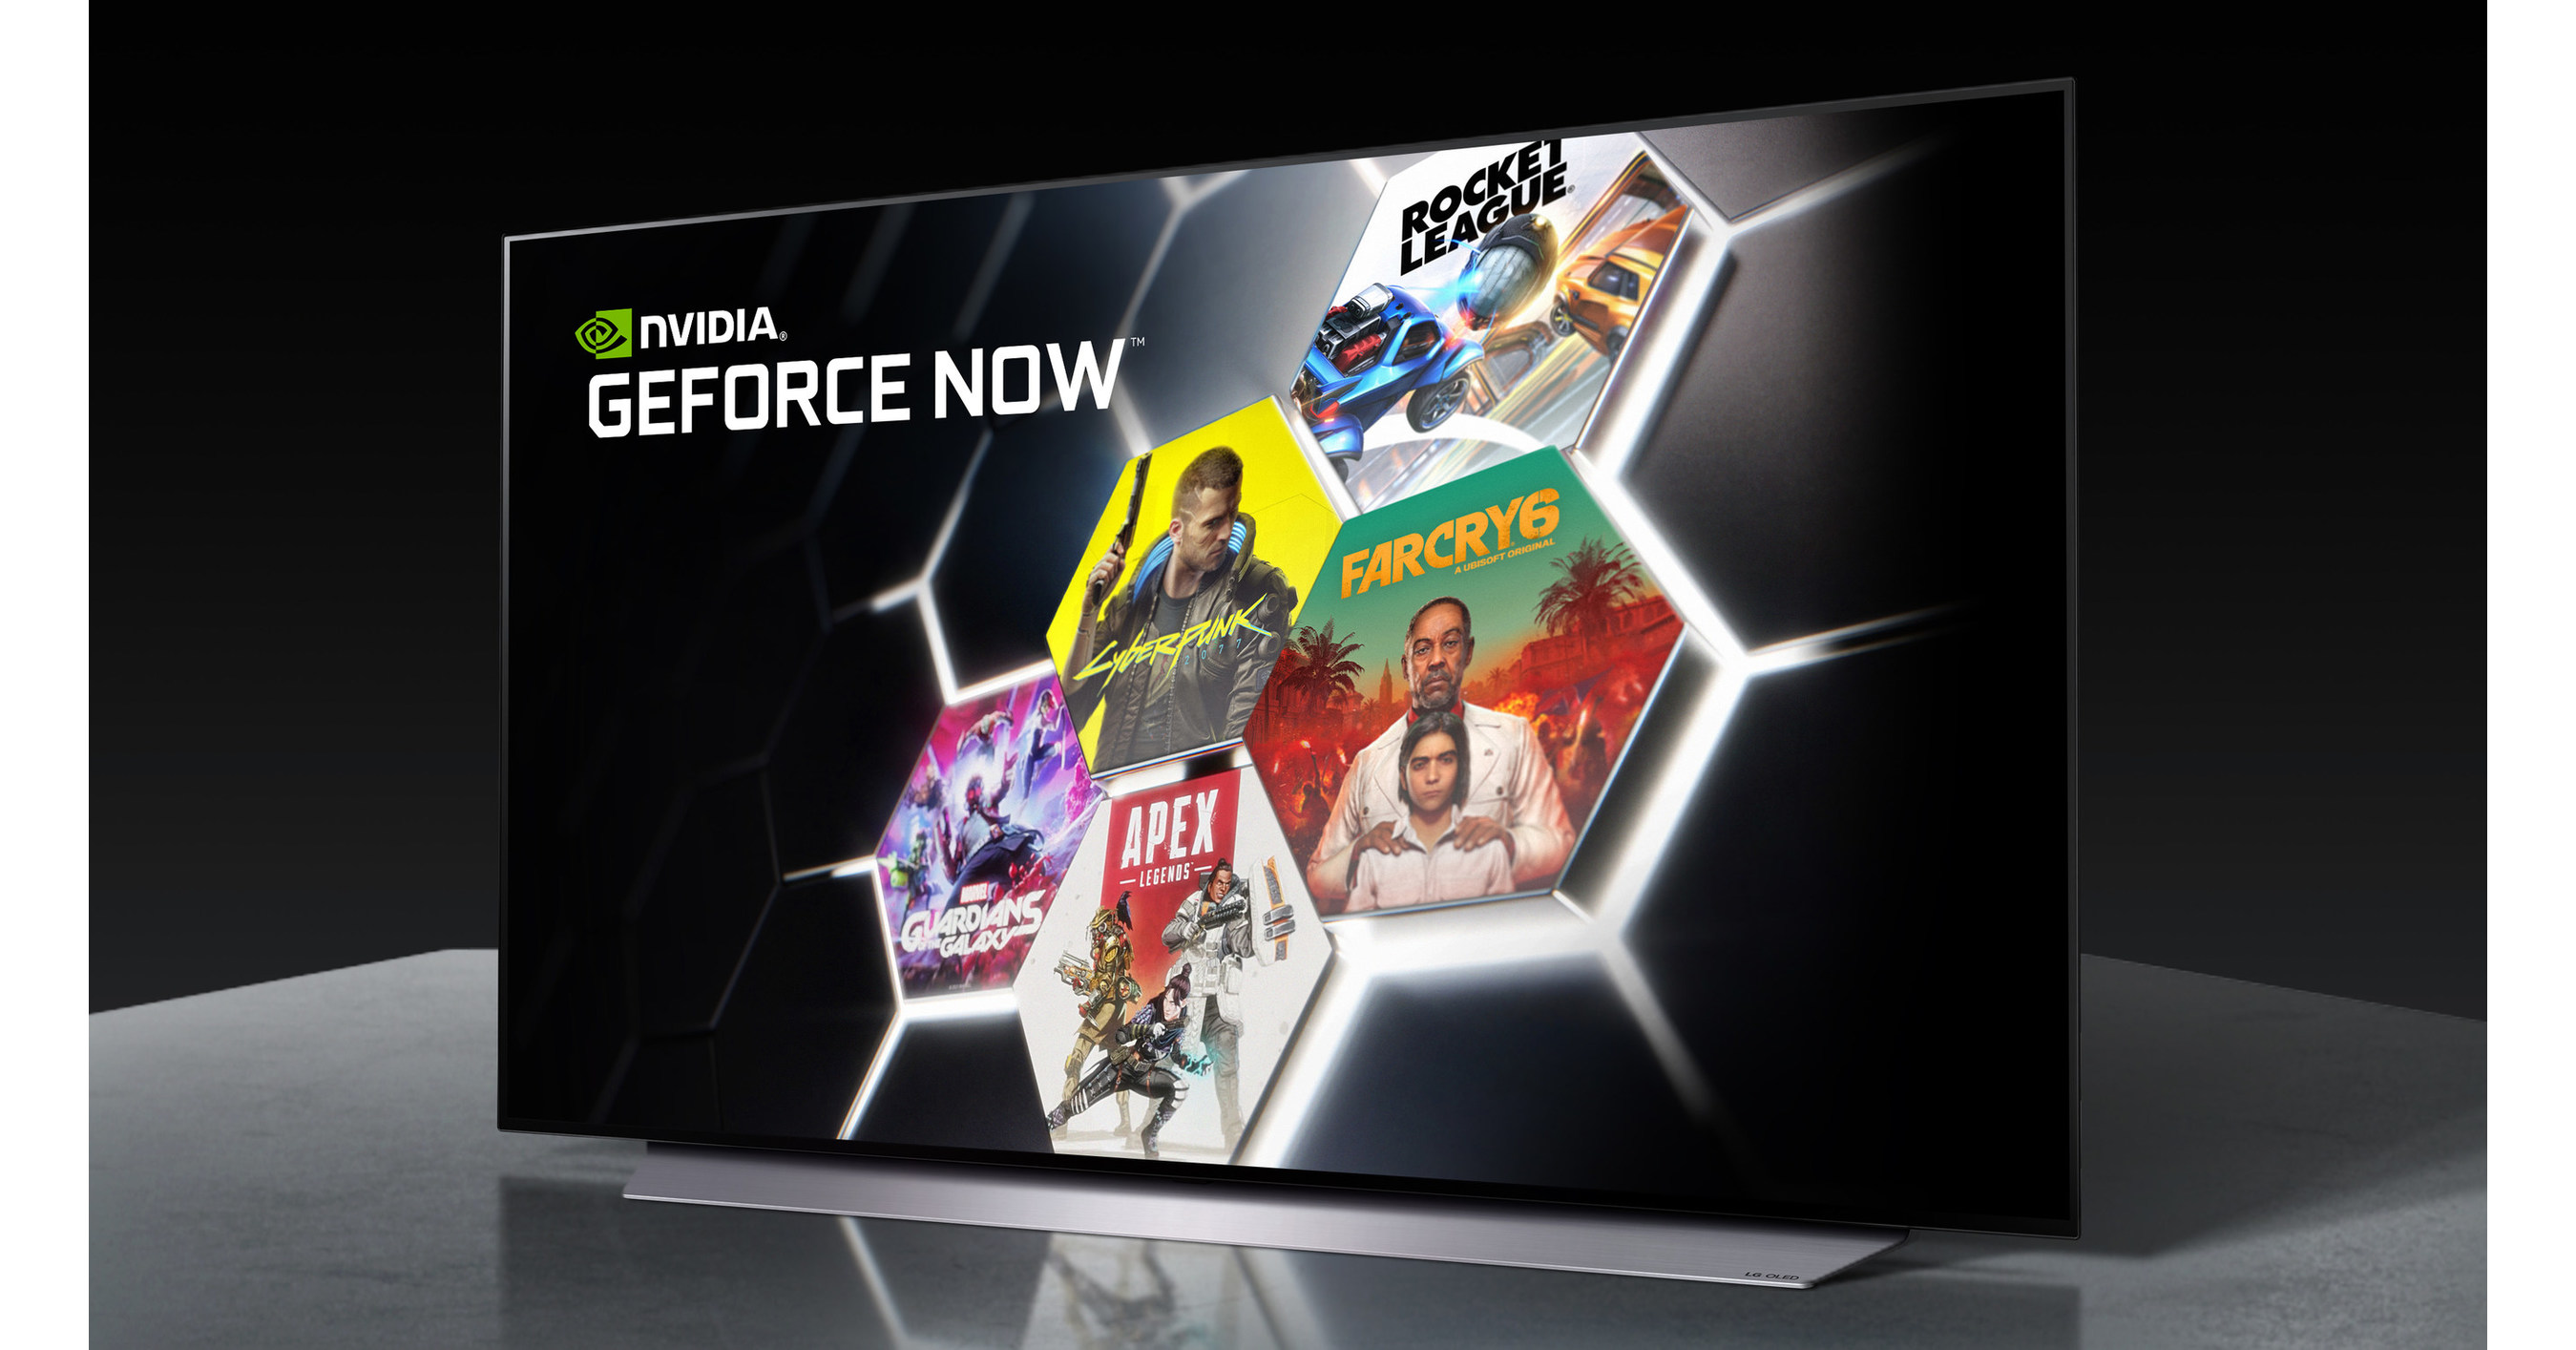 Overseas review summary of NVIDIA's cloud game service 'GeForce